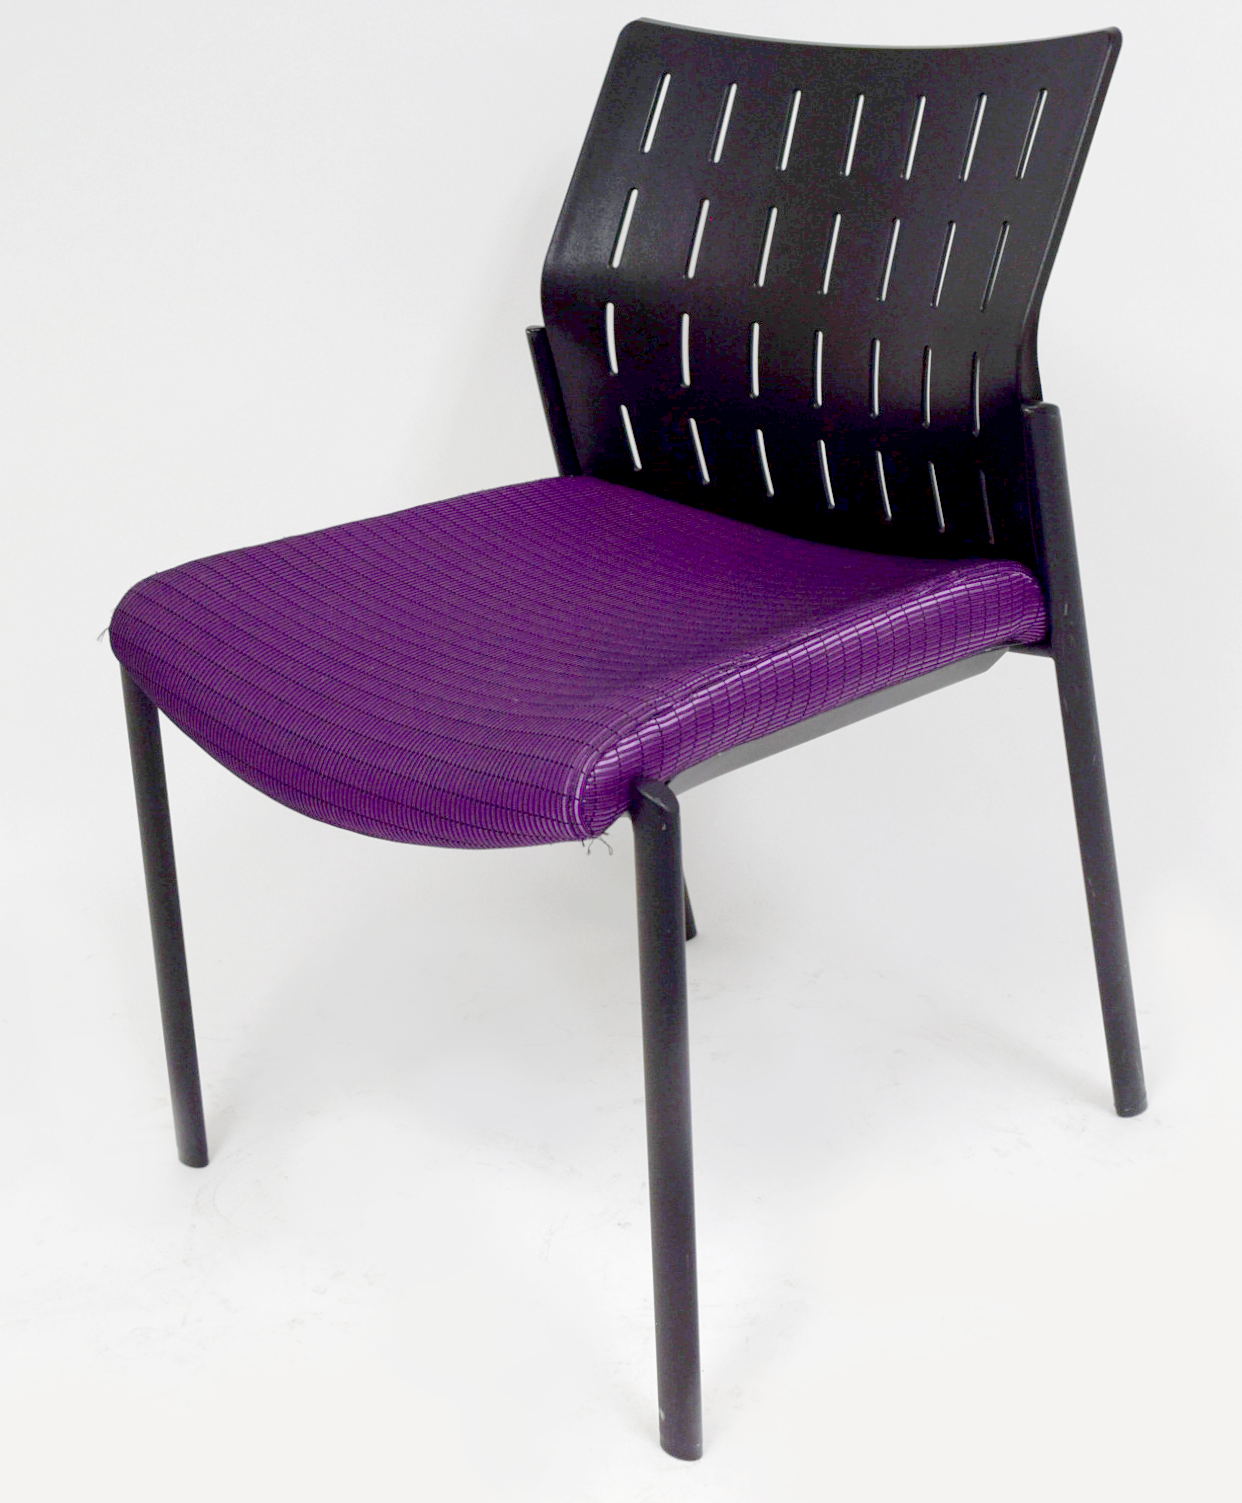 SitOnIt Achieve Purple Vinyl Stacking Chair - ChairTech